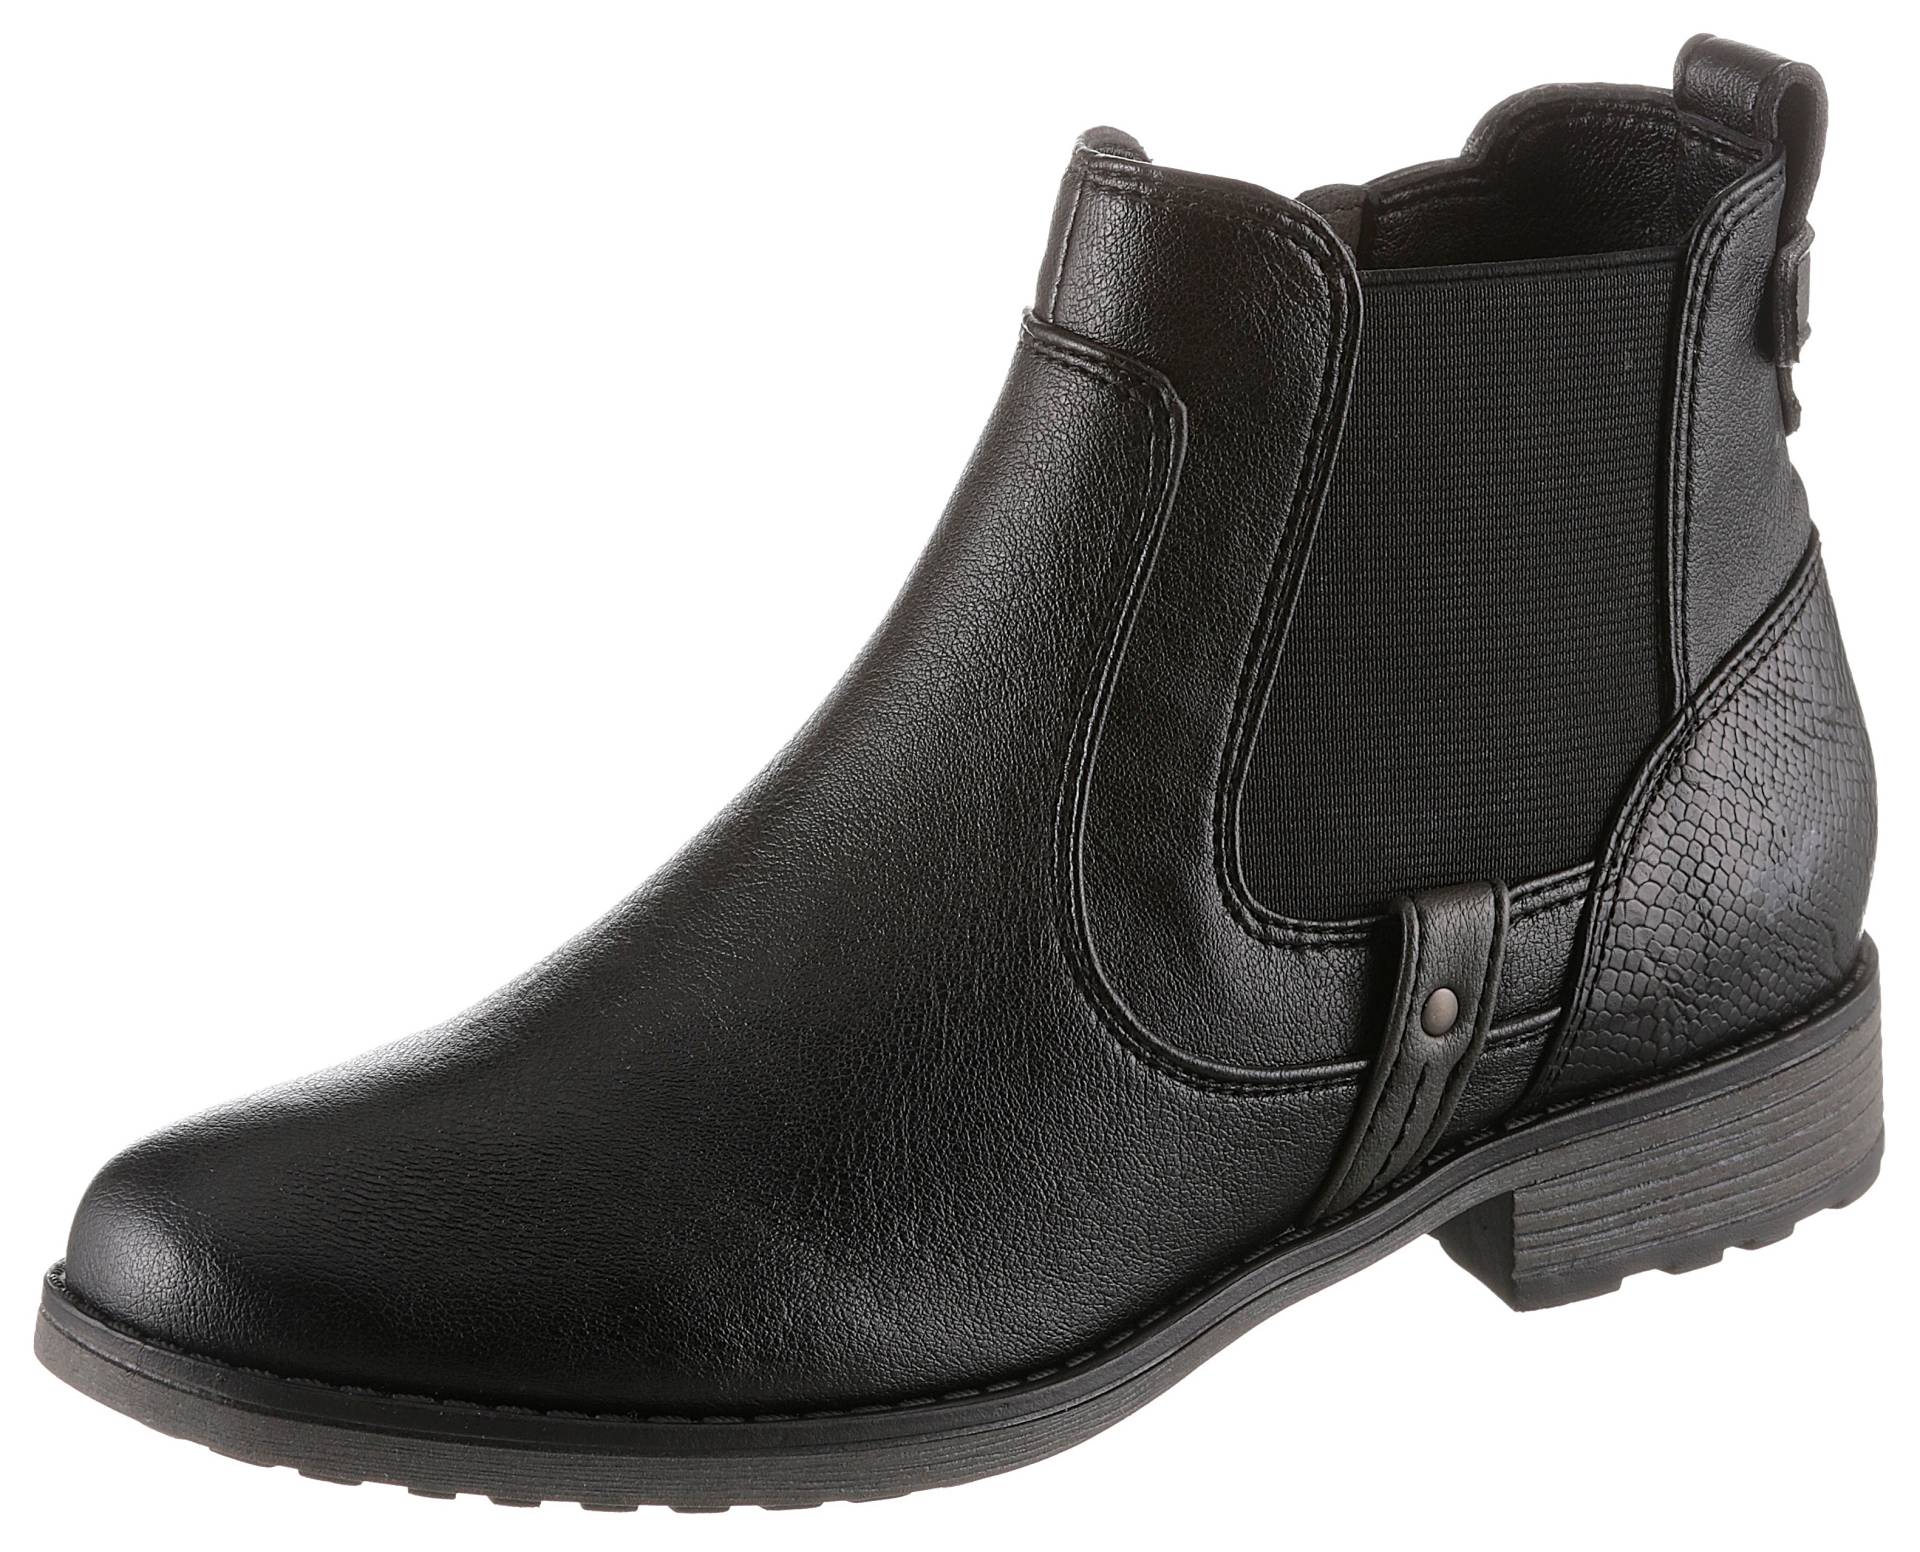 Mustang Shoes Chelseaboots von mustang shoes